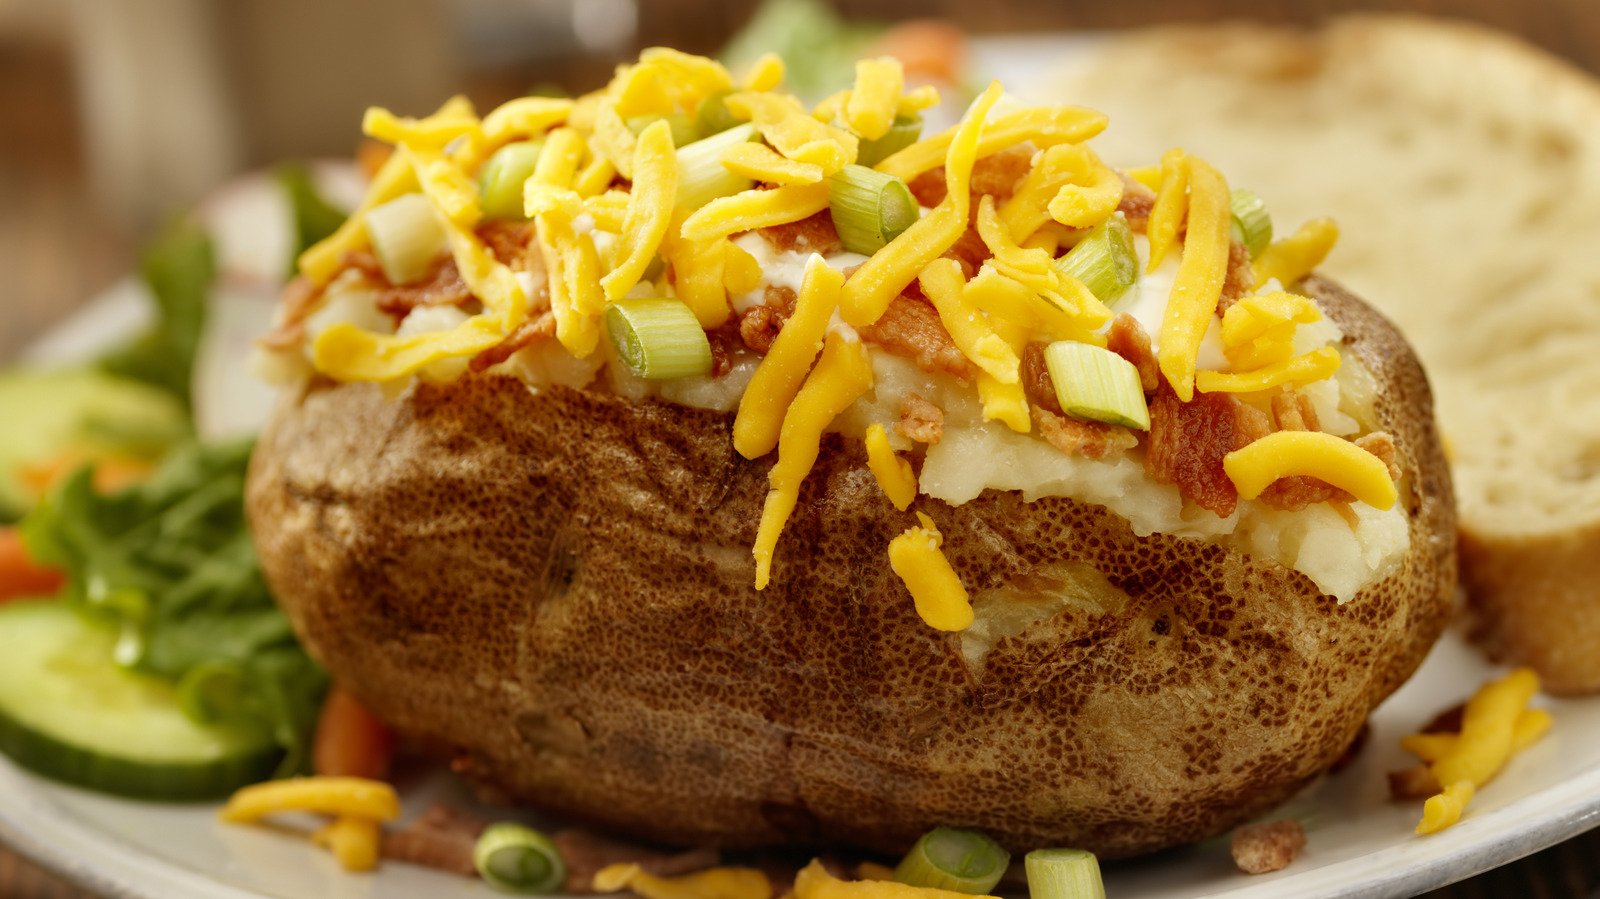 14 Mistakes Everyone Makes With Baked Potatoes